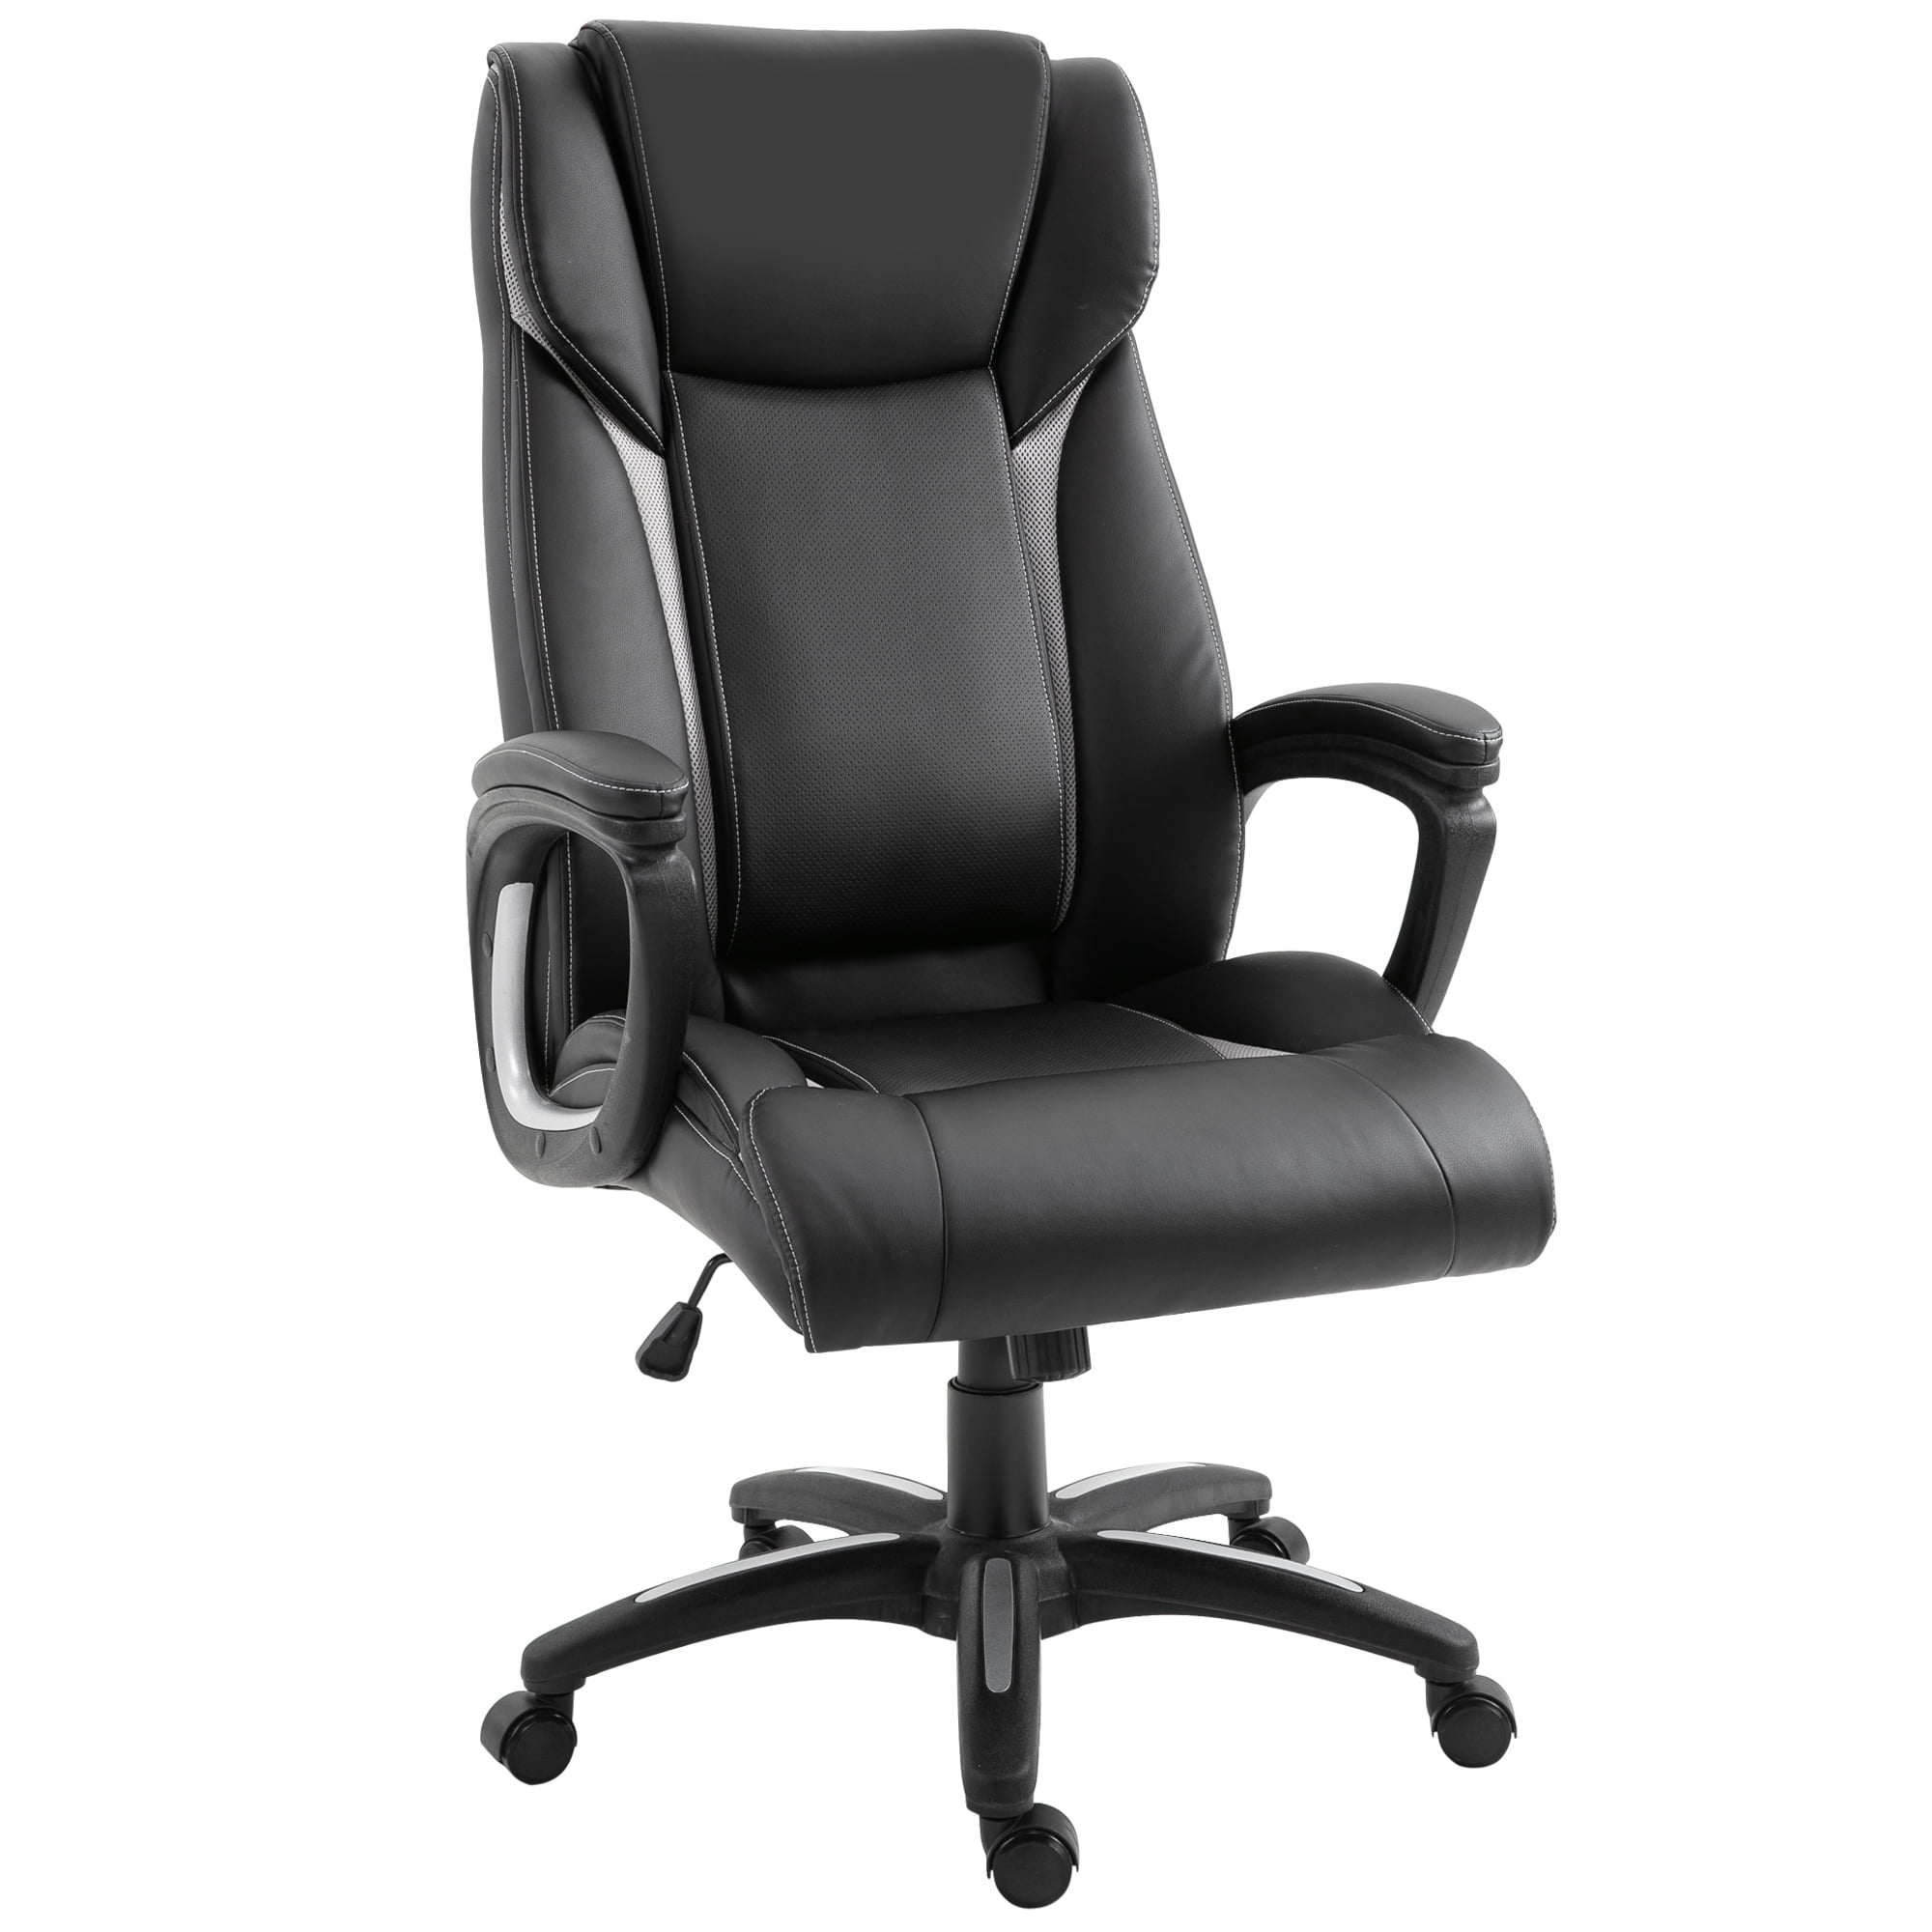 Vinsetto Ergonomic Office Chair Adjustable Height Breathable PU Leather